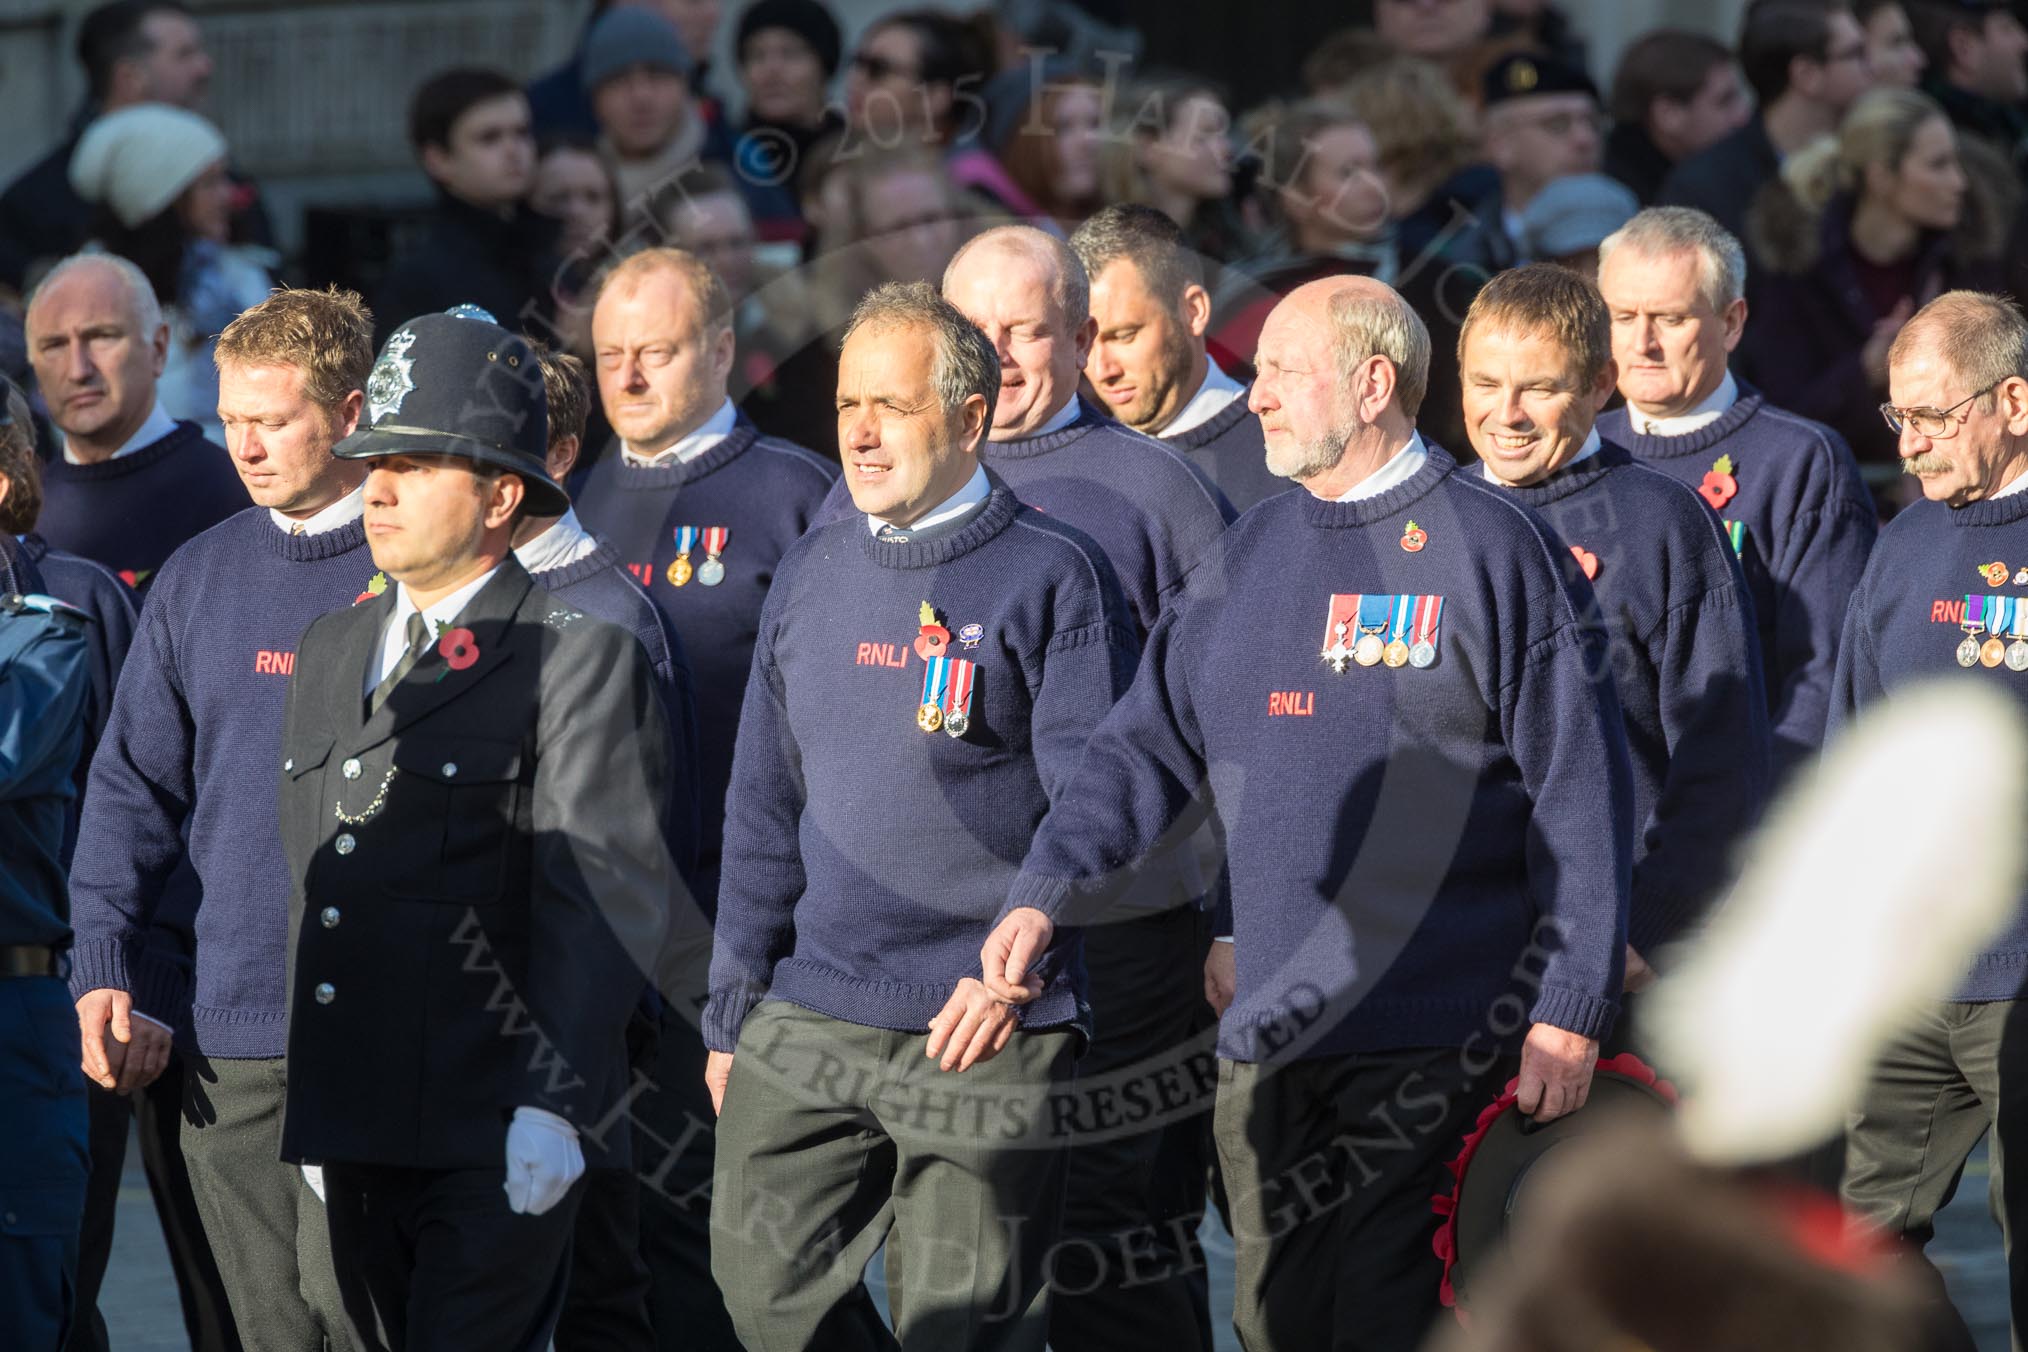 March Past, Remembrance Sunday at the Cenotaph 2016: M41 Royal National Lifeboat Institution.
Cenotaph, Whitehall, London SW1,
London,
Greater London,
United Kingdom,
on 13 November 2016 at 13:19, image #2951